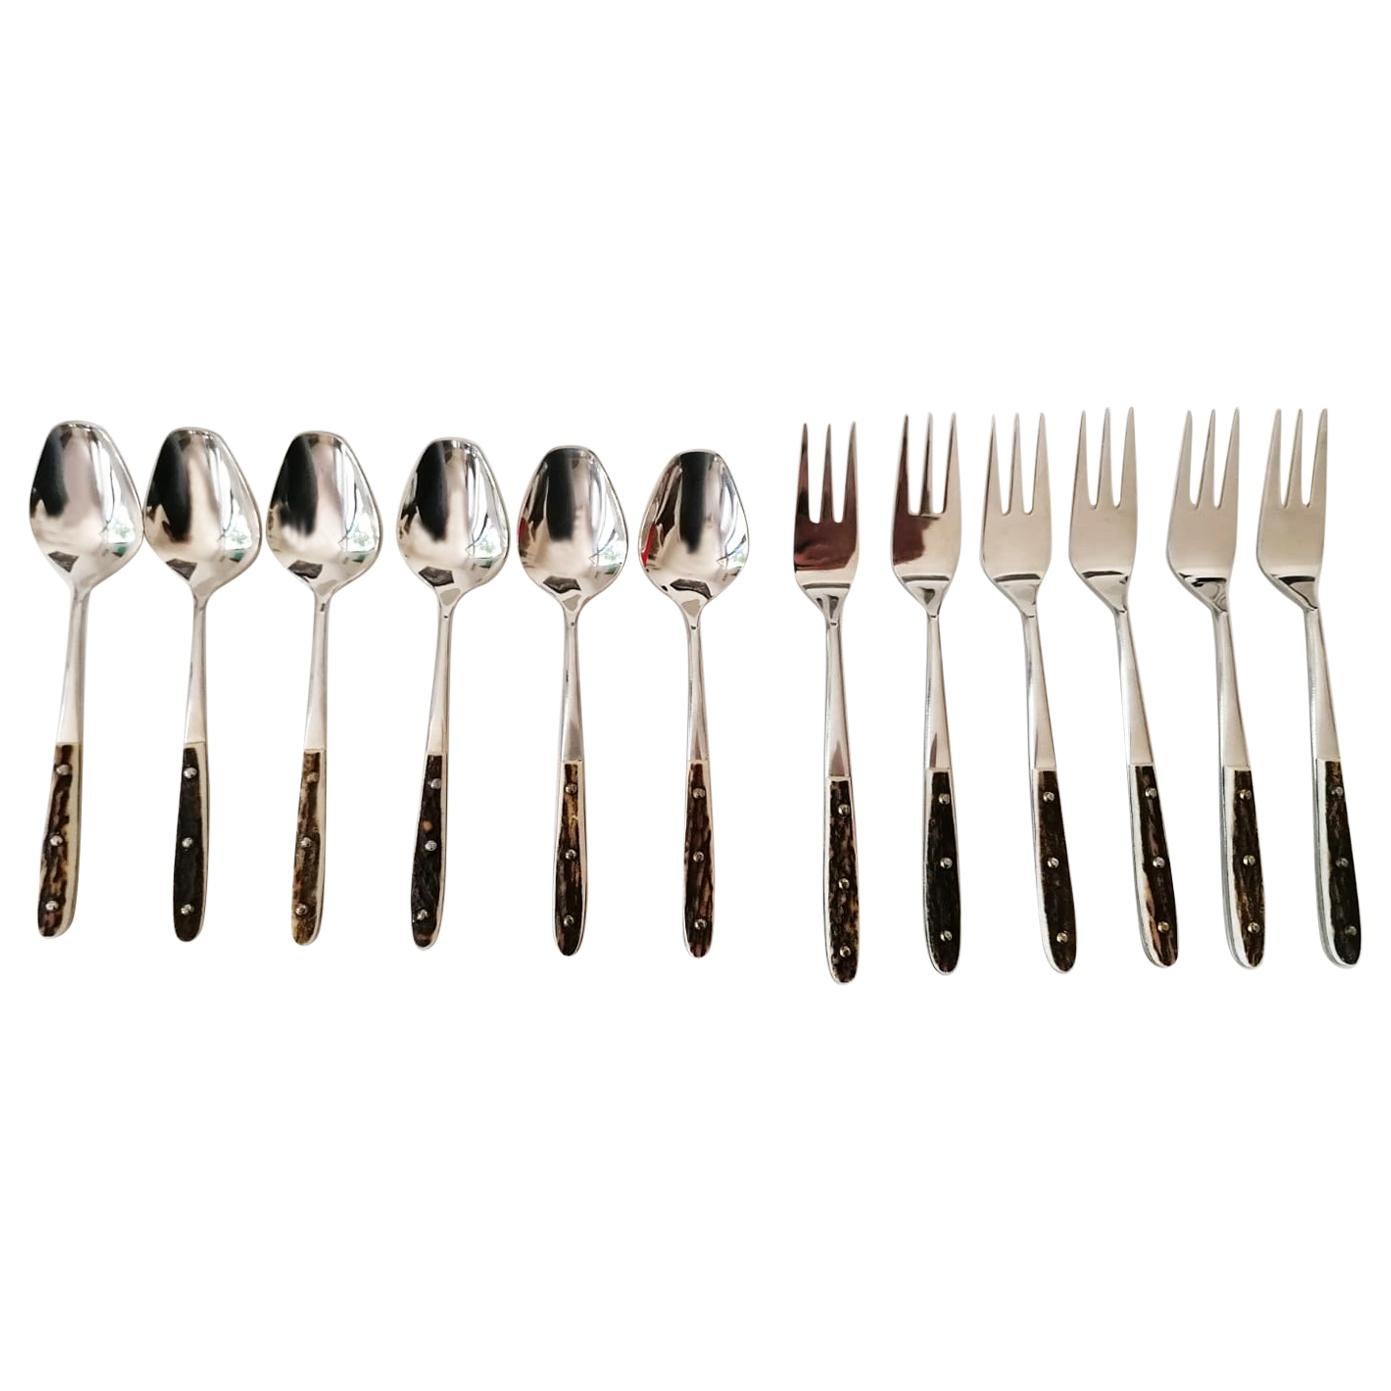 Part of Cutlery by Helmut Alder for Amboss Model 2070 For Sale